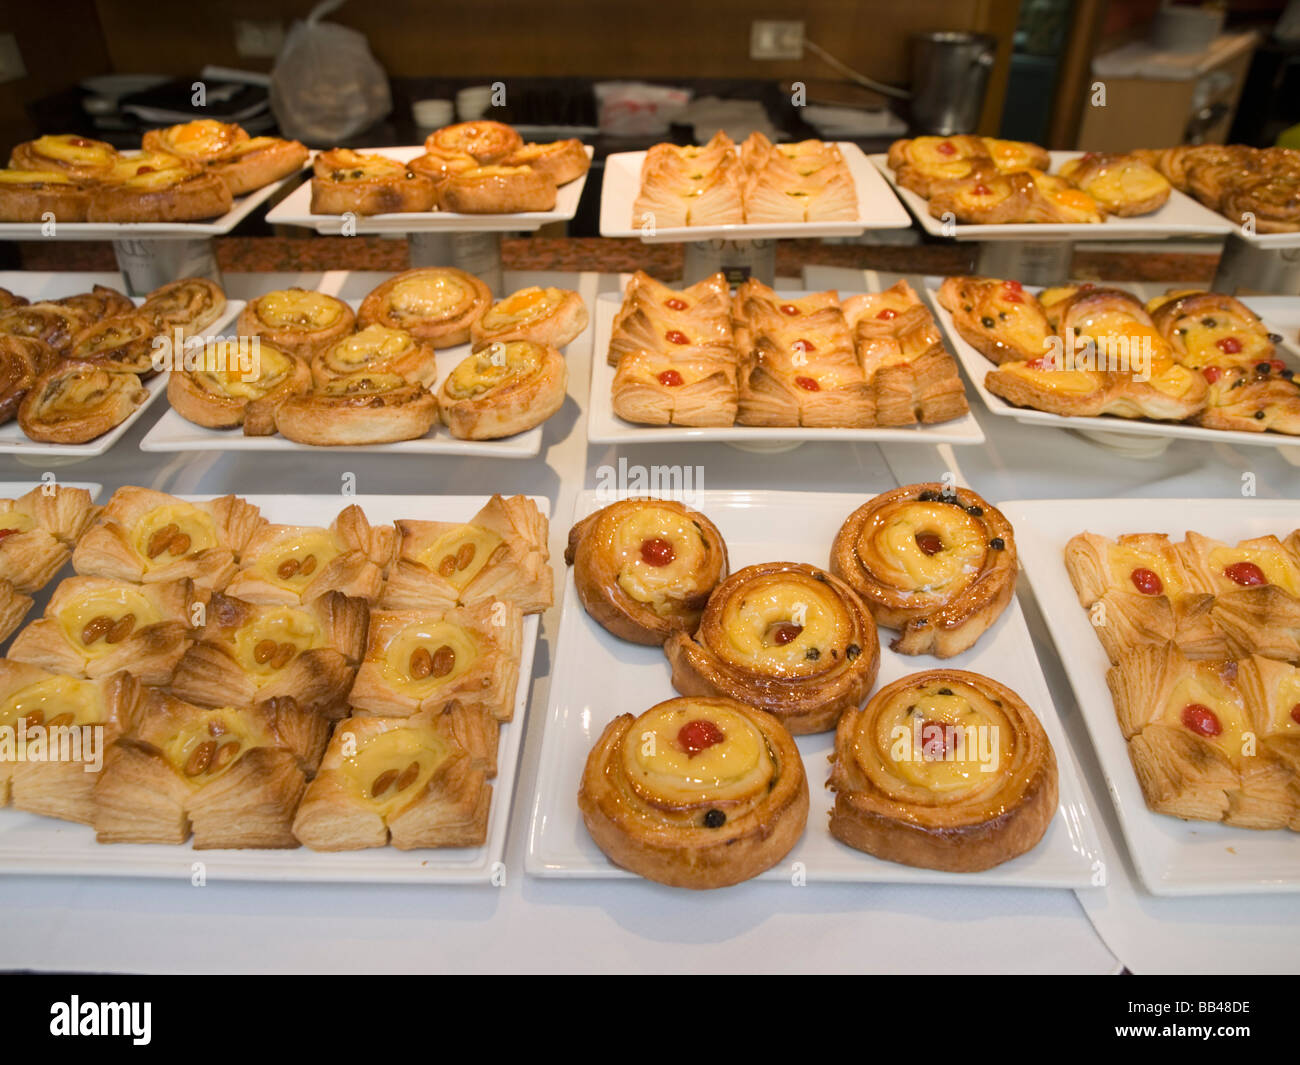 A pastry display in a cafe in Buenos Aires, Argentina. Stock Photo